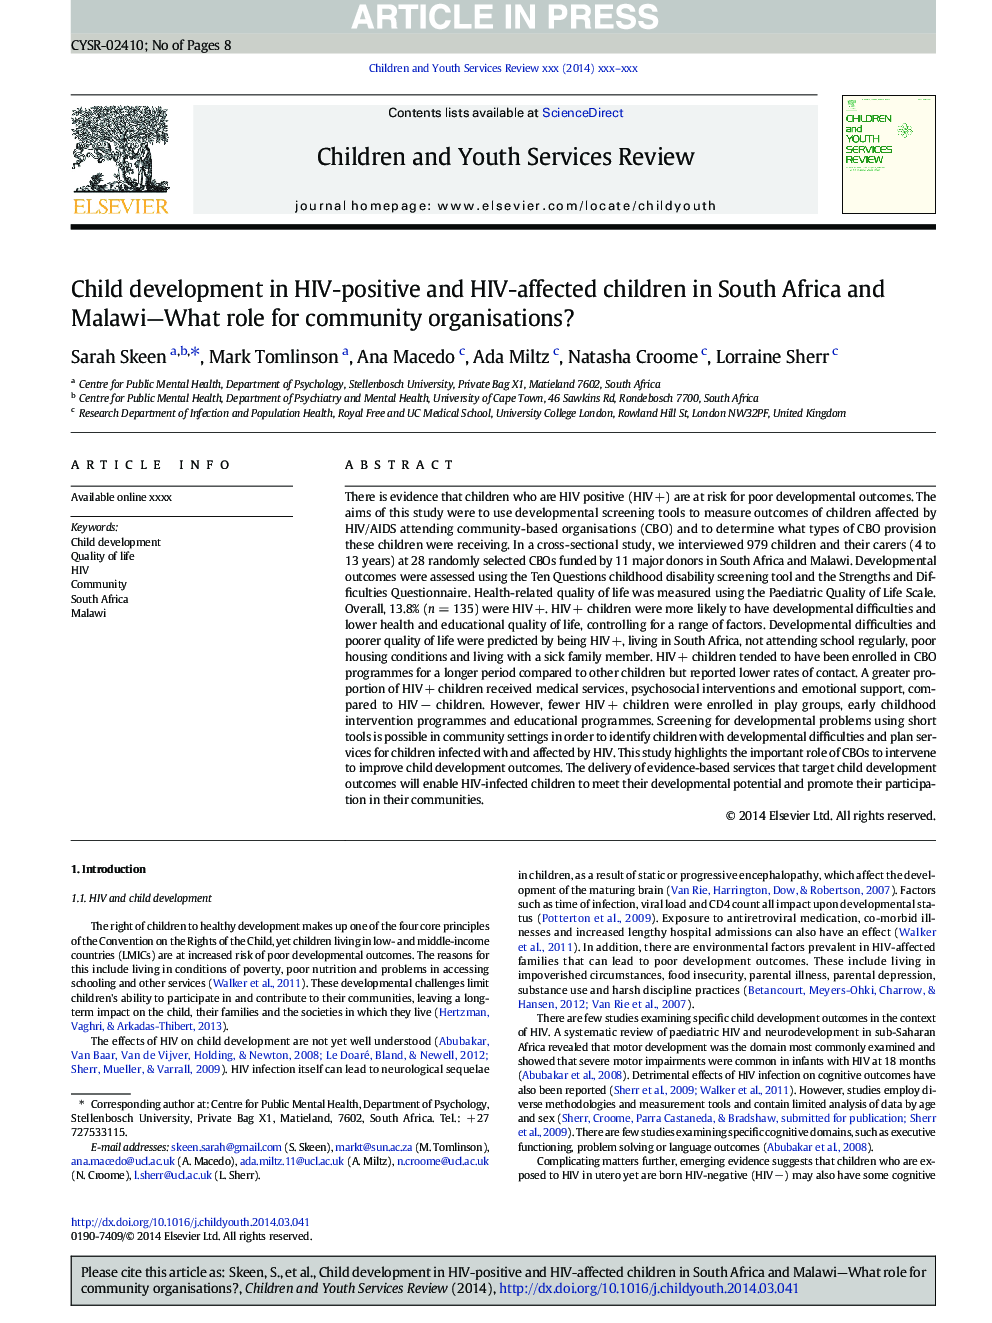 Child development in HIV-positive and HIV-affected children in South Africa and Malawi-What role for community organisations?